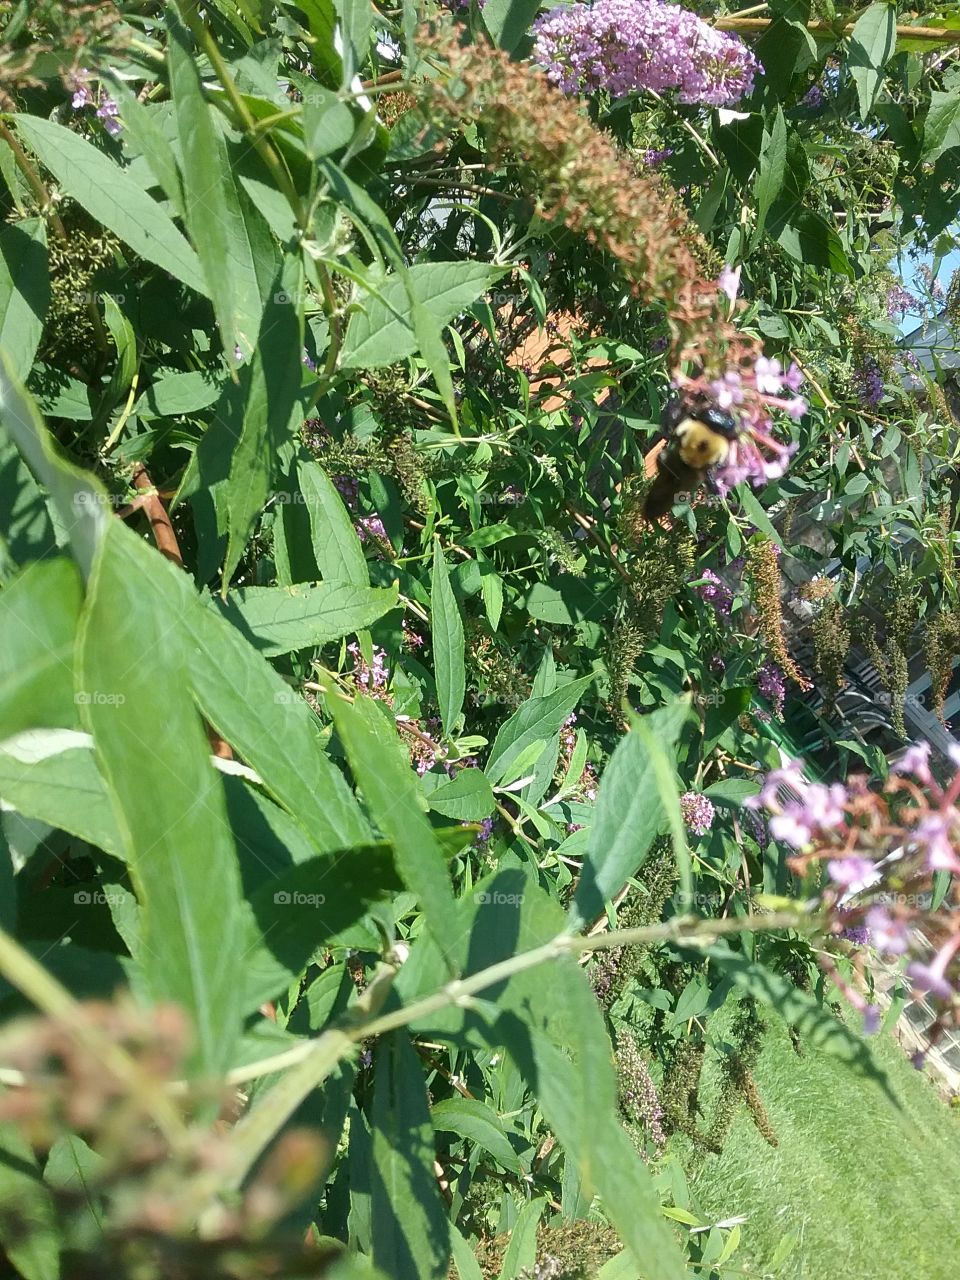 Bees on the butterfly bush